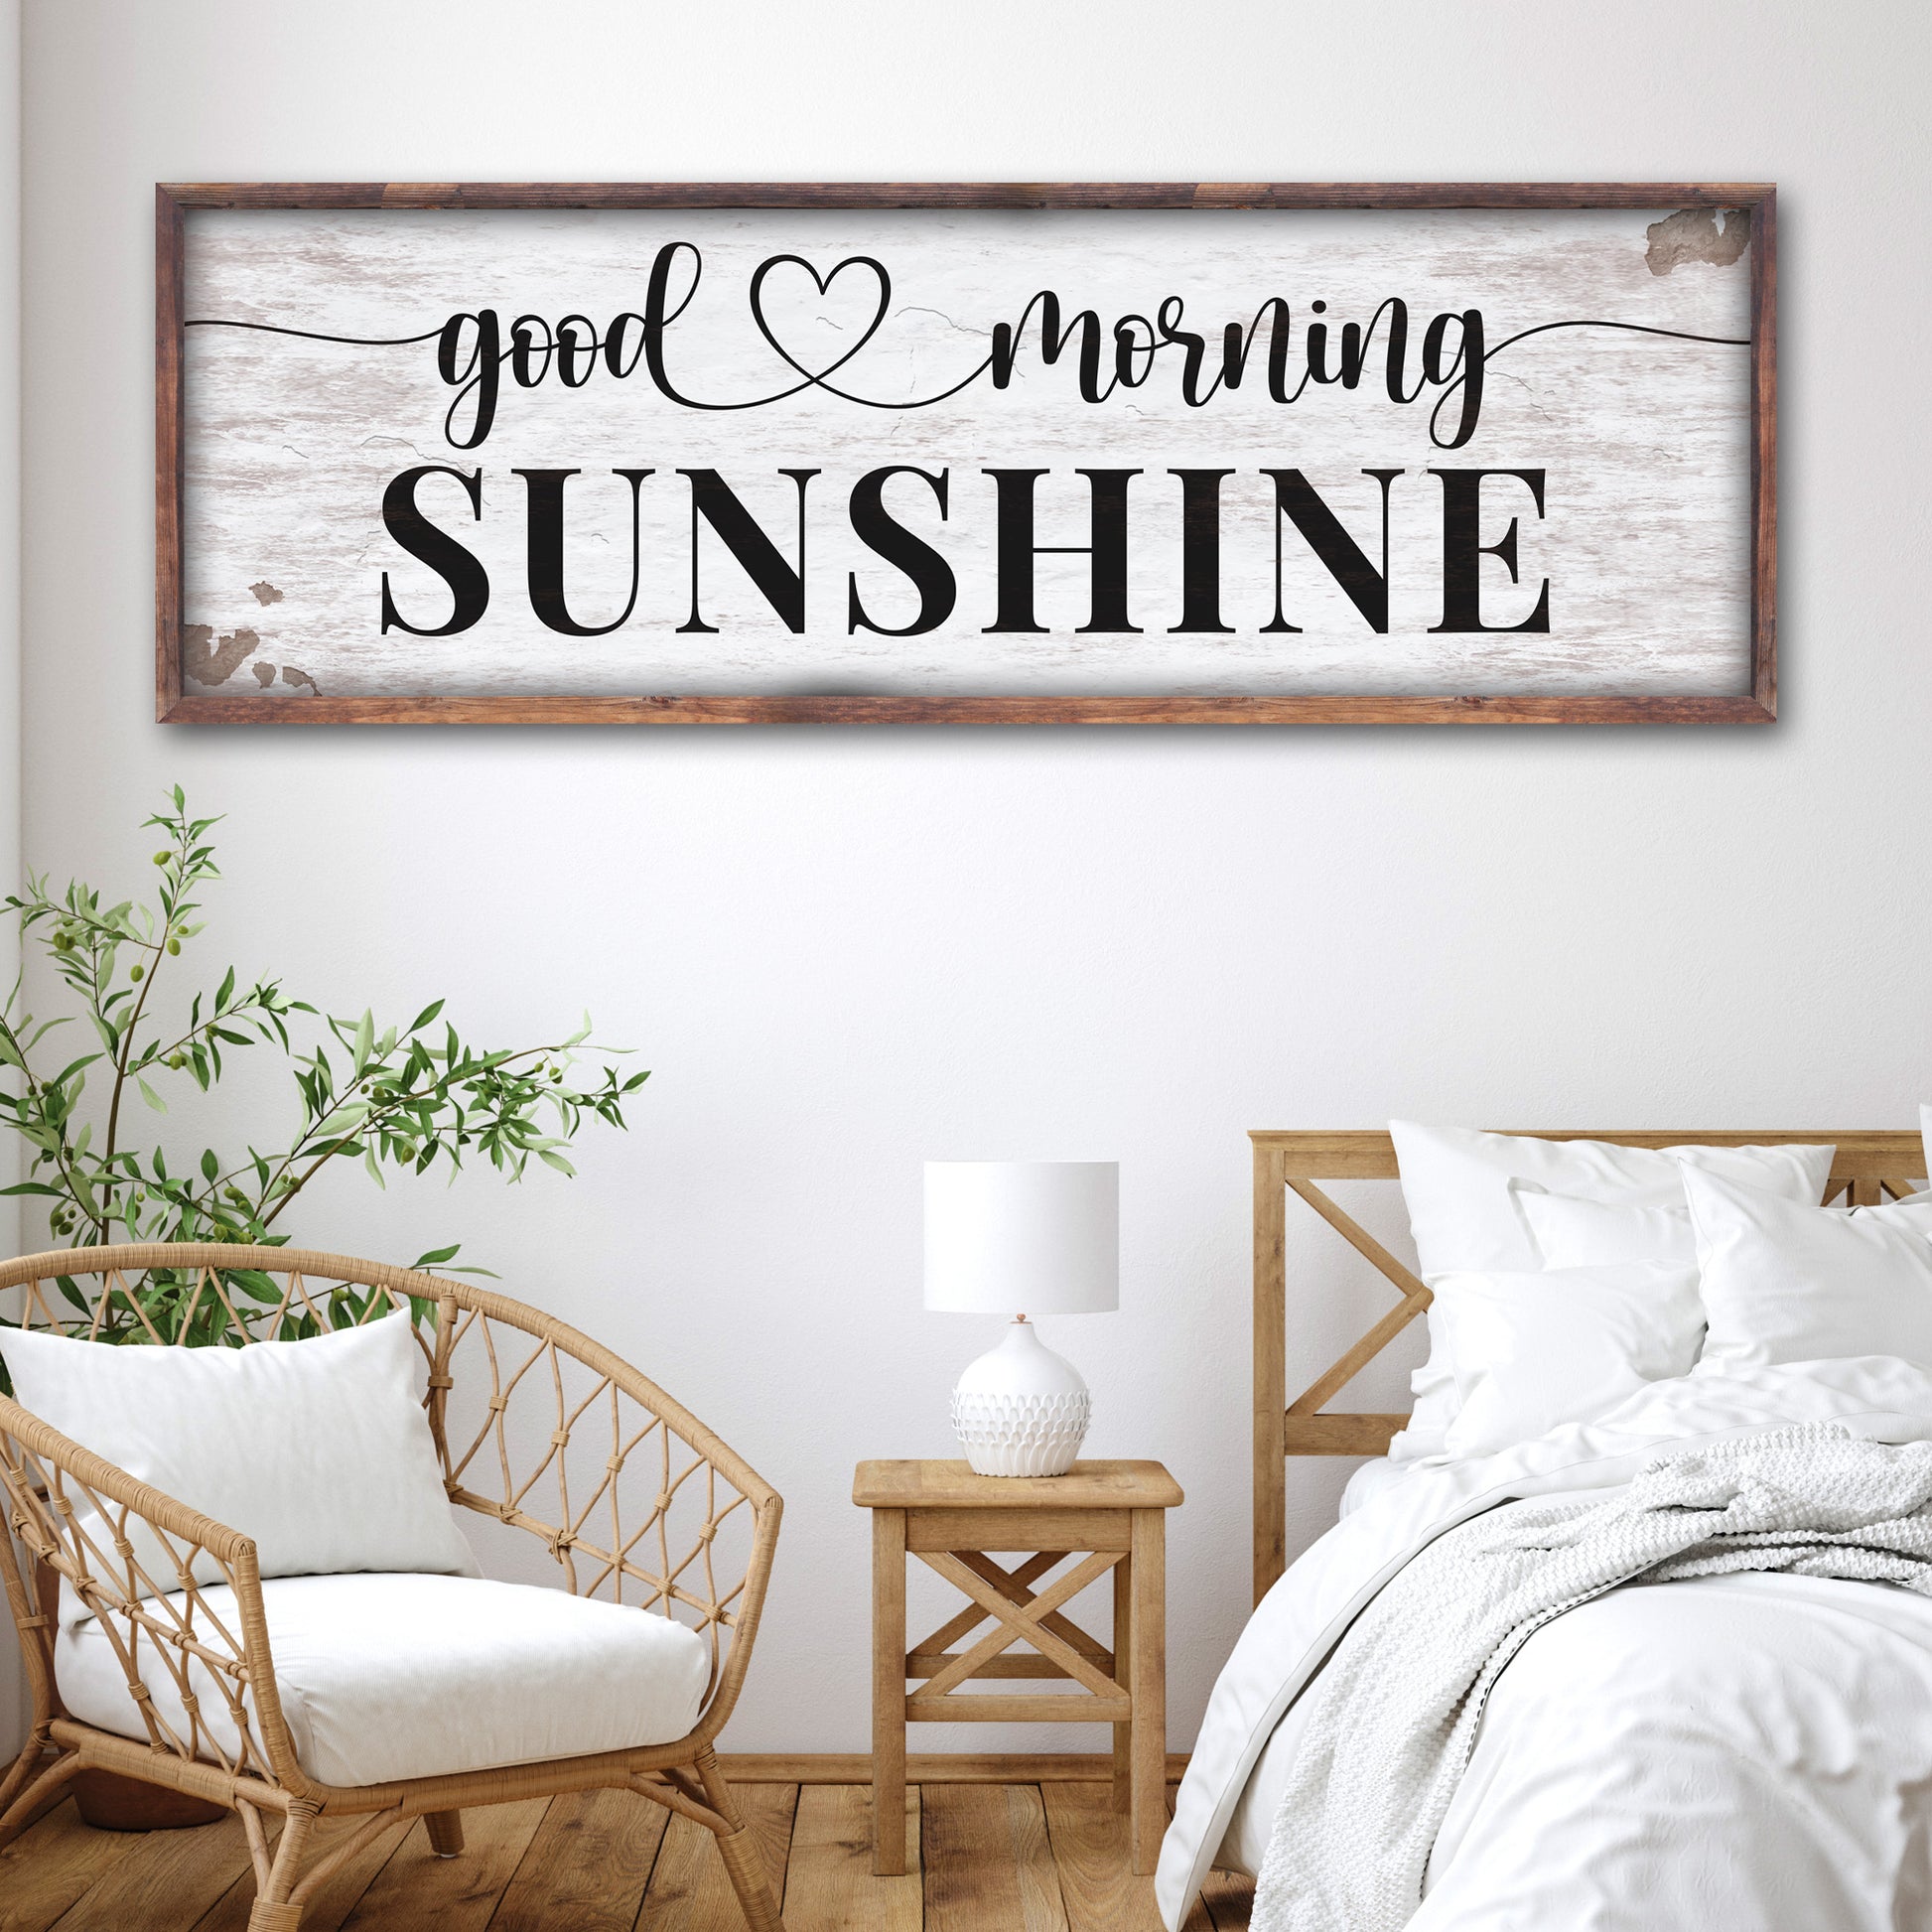 Good Morning Sunshine Sign - Image by Tailored Canvases